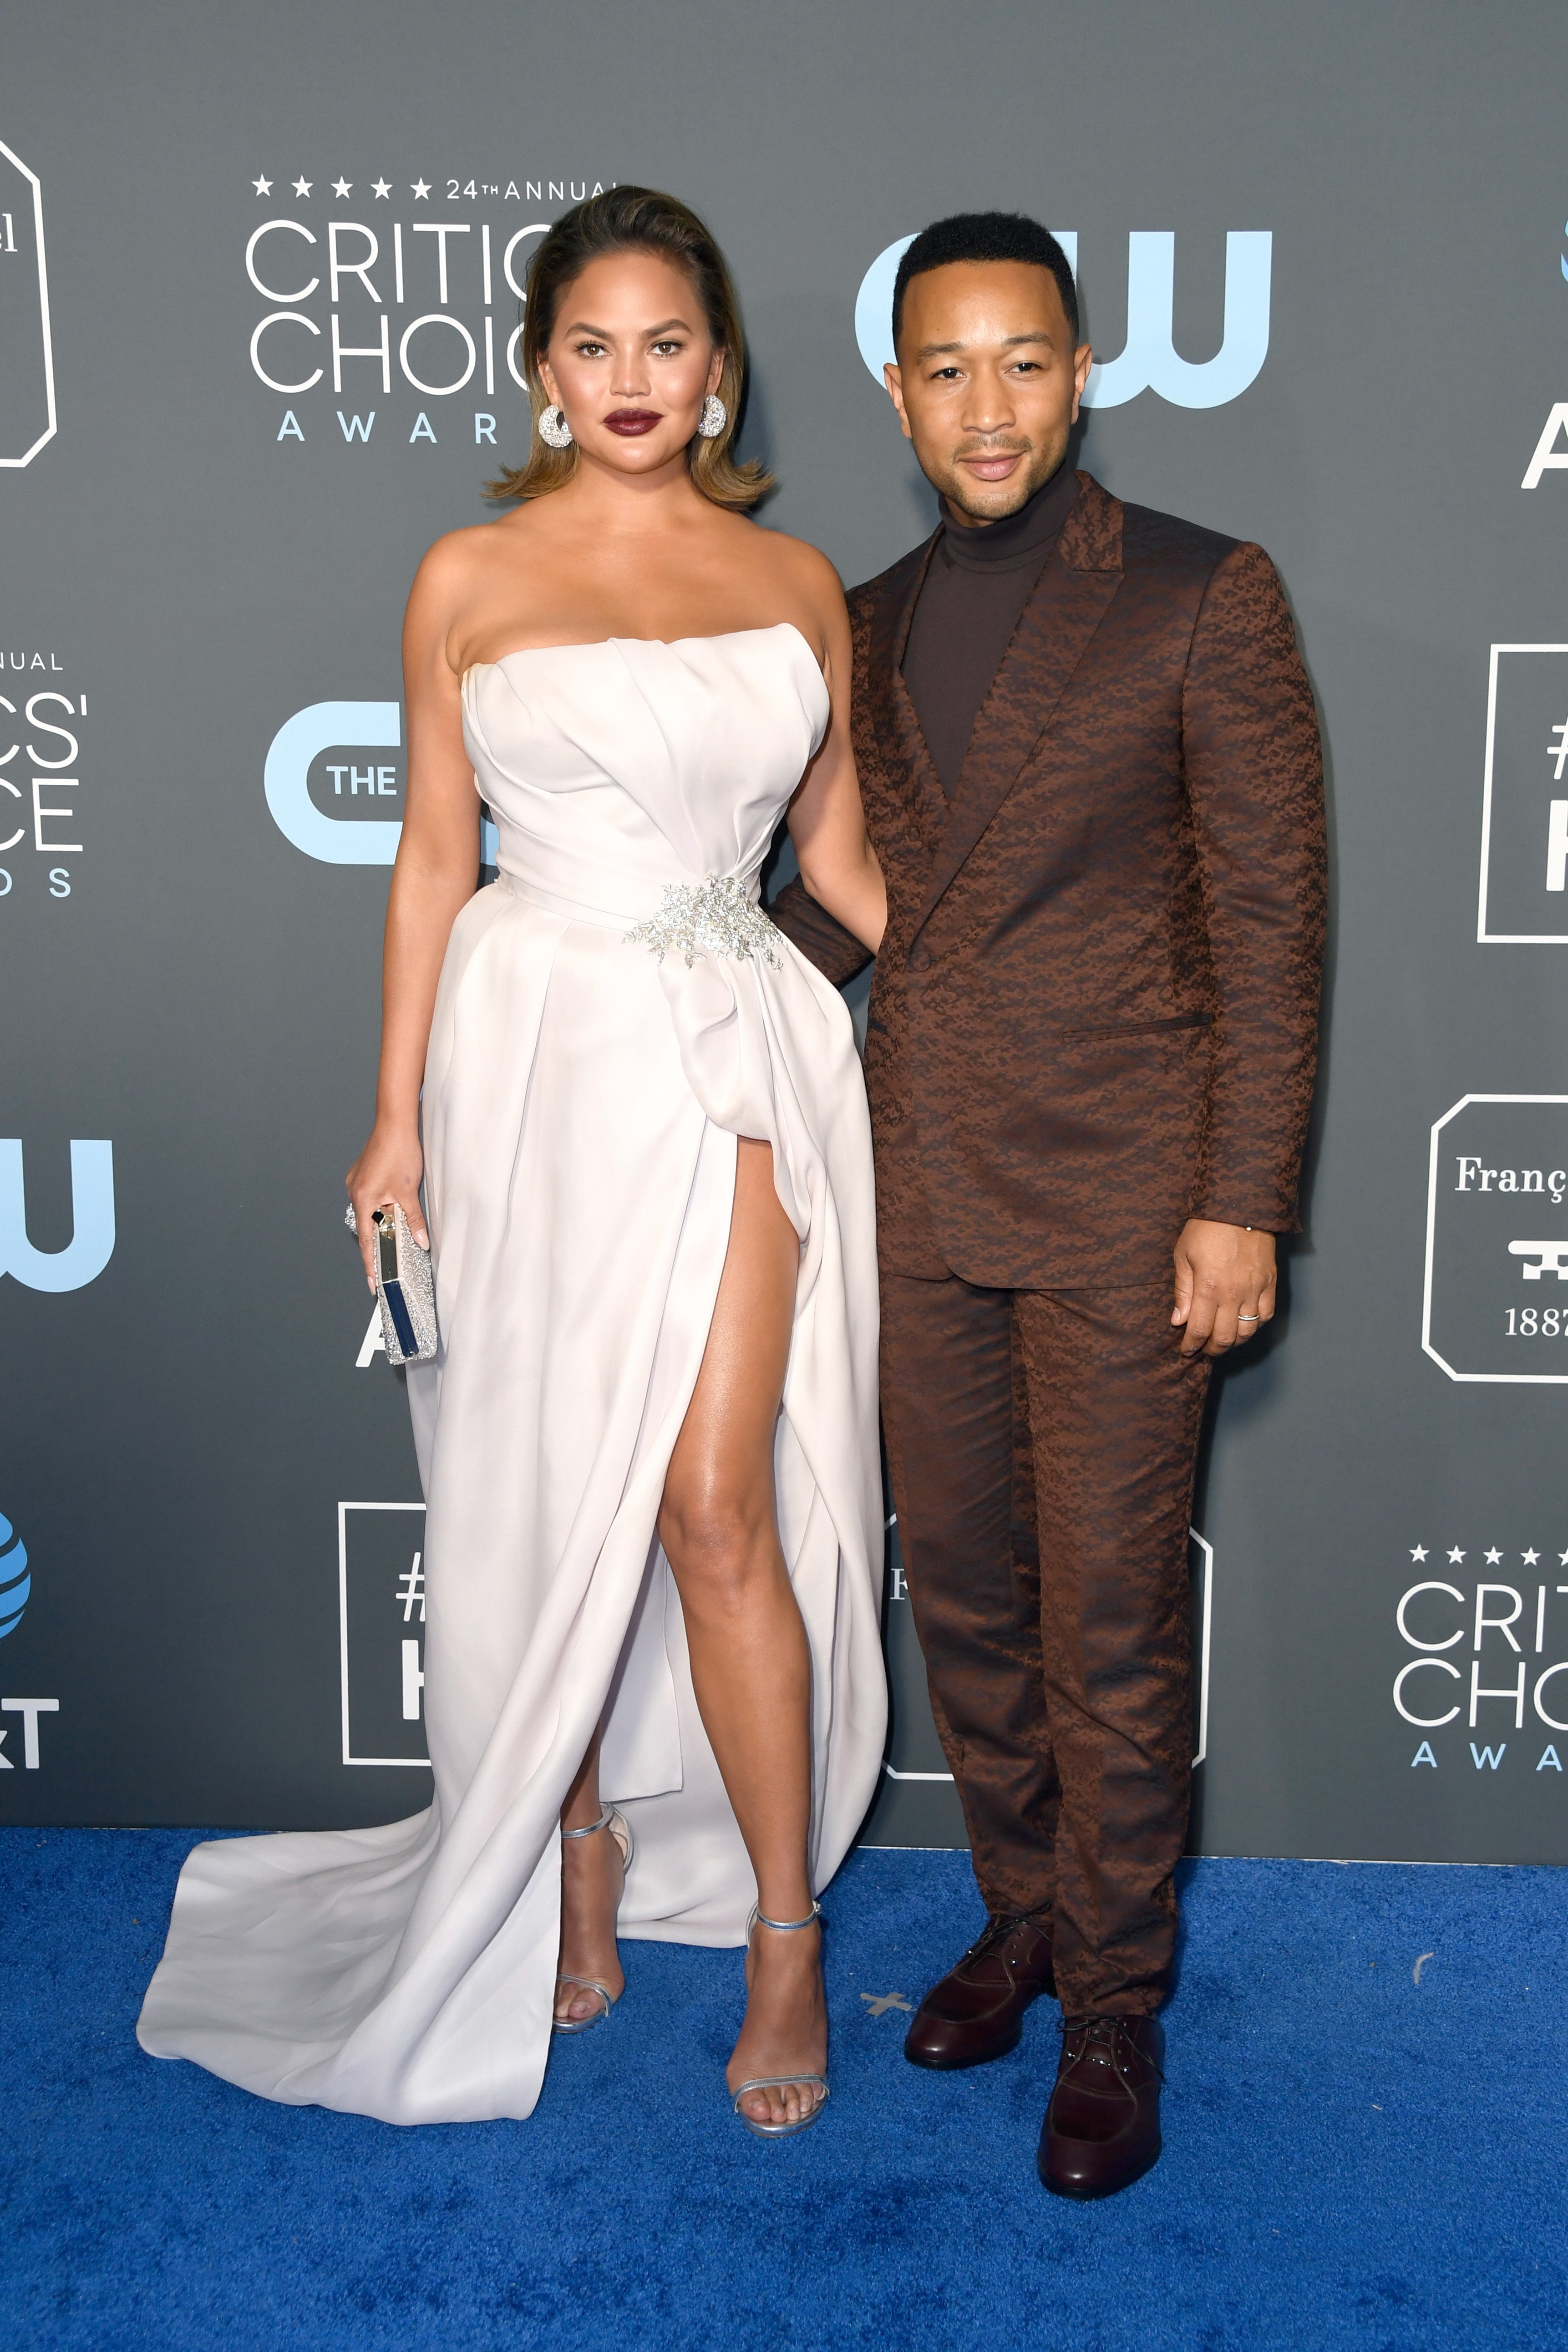  Chrissy Teigen and John Legend at the 24th annual Critics' Choice Awards 2019 in California | Source: Getty Images